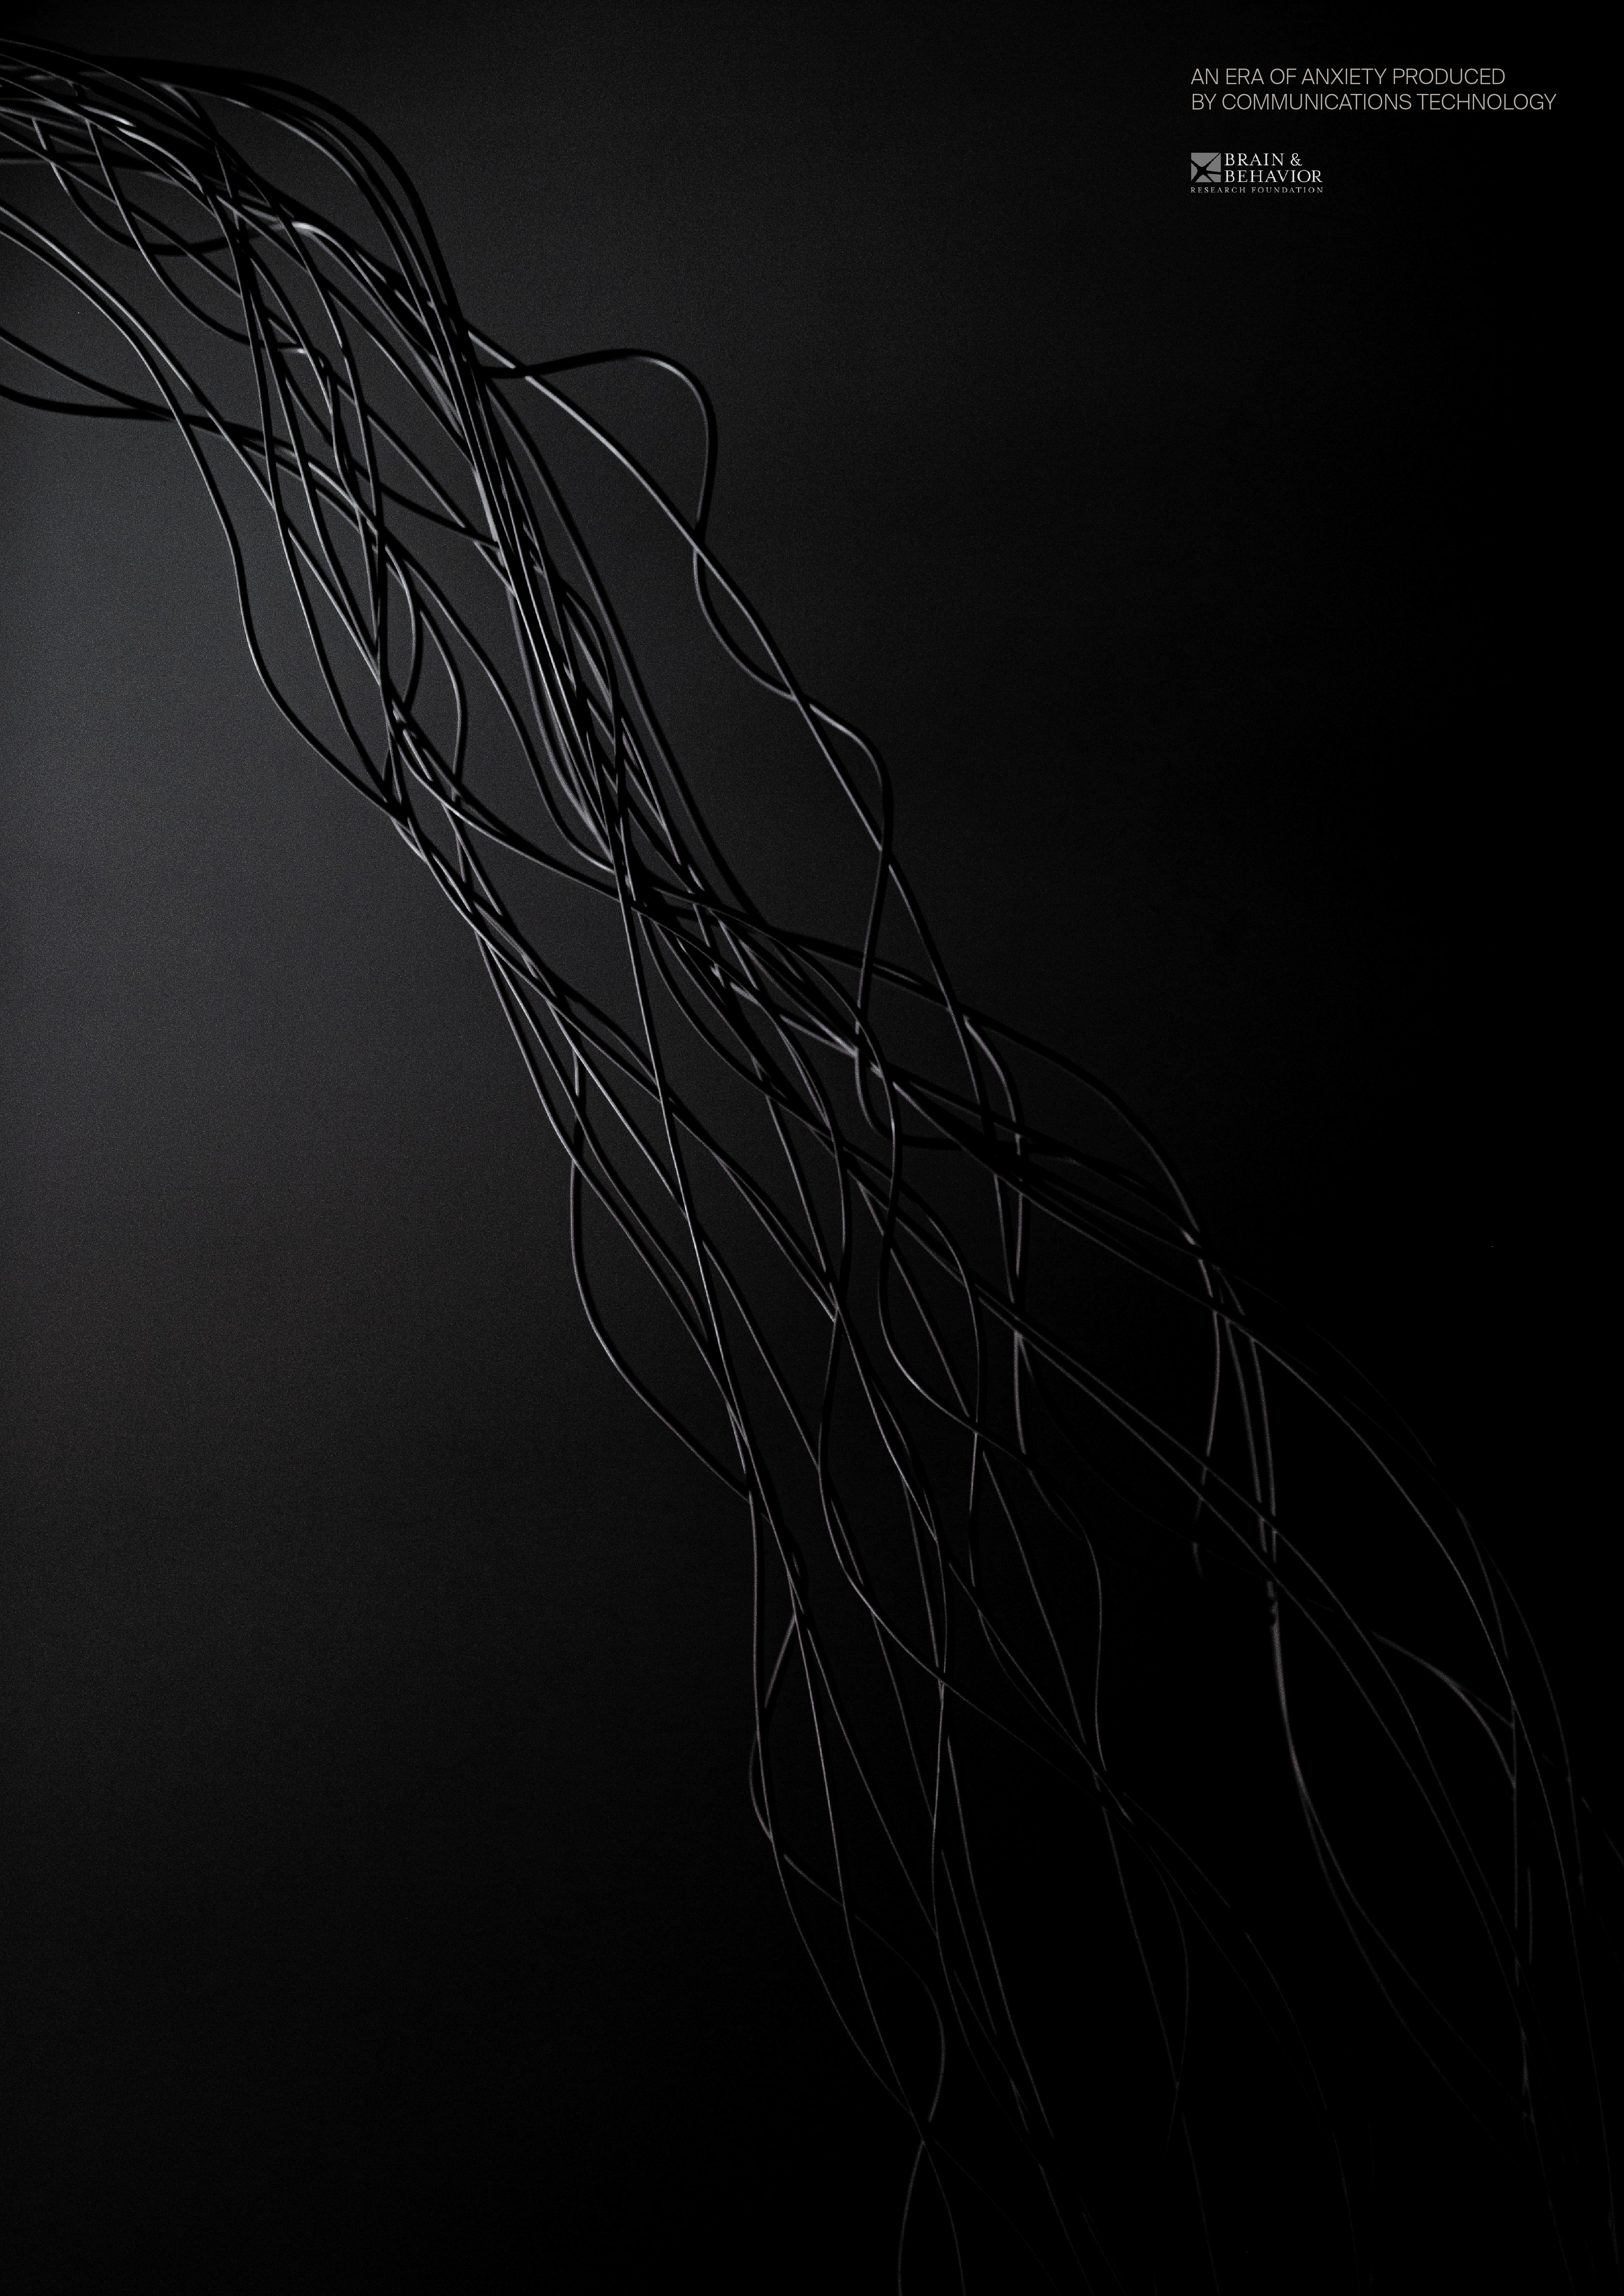 Tangled cables within black setting